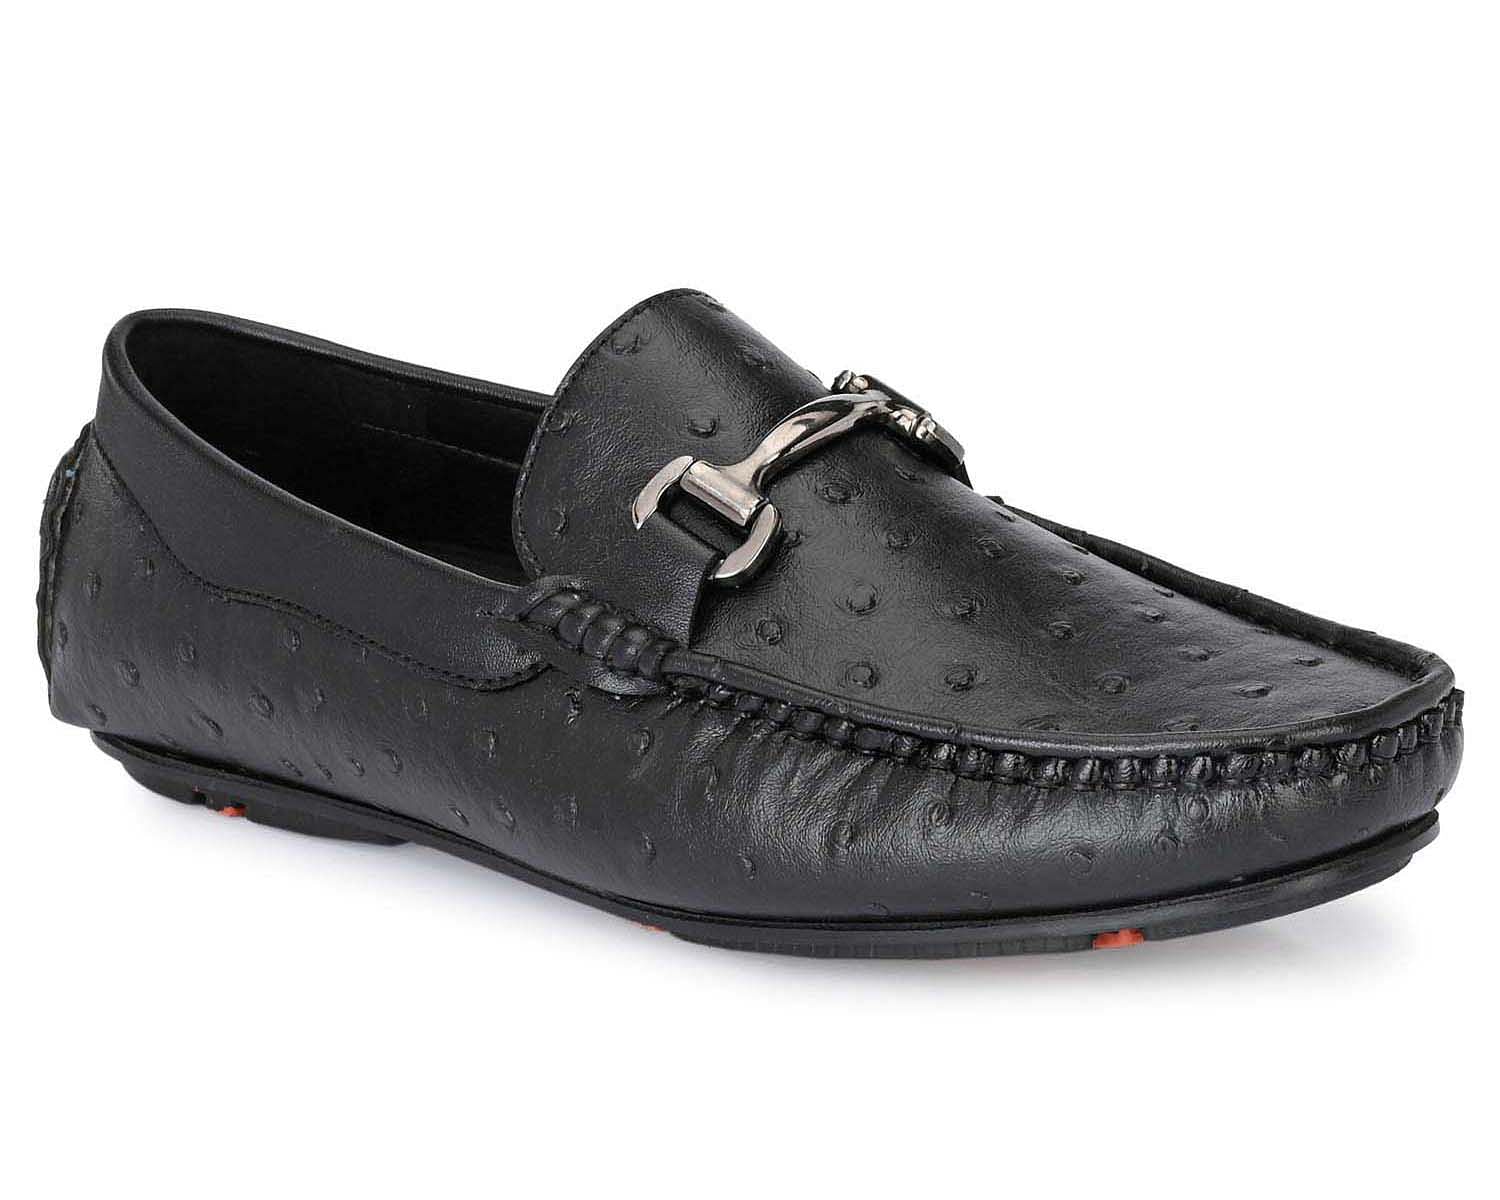 Pair-it Men's Loafers Shoes -KF-Loafer 115- Black